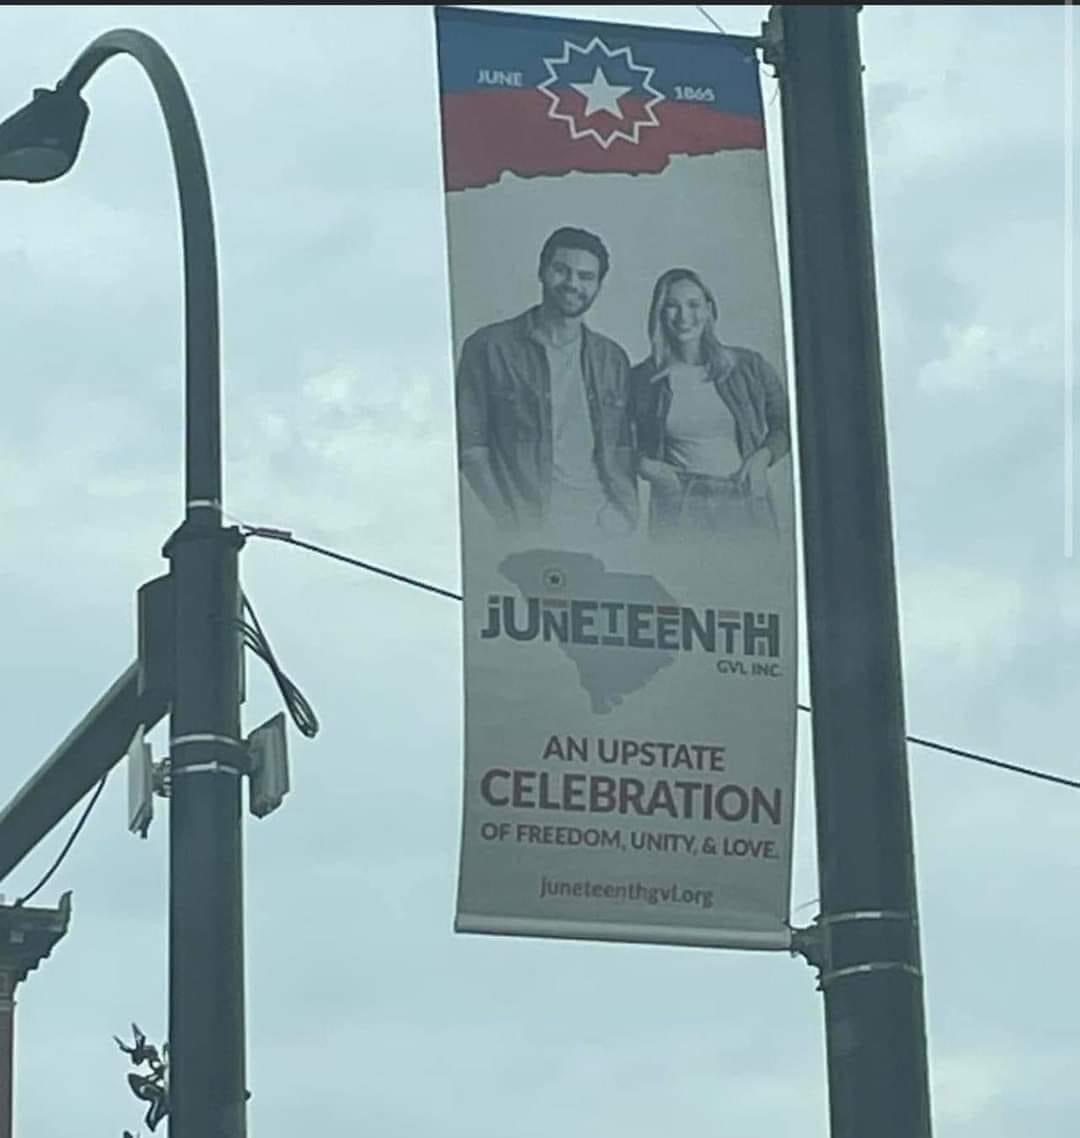 WTAF is this South Carolina? There weren't ANY Black people available for your Juneteenth promo banner? None? WHAT ARE YOU TRYING TO SAY WITH THIS? 

White people don't appropriate BIPOC traditions challenge: IMPOSSIBLE